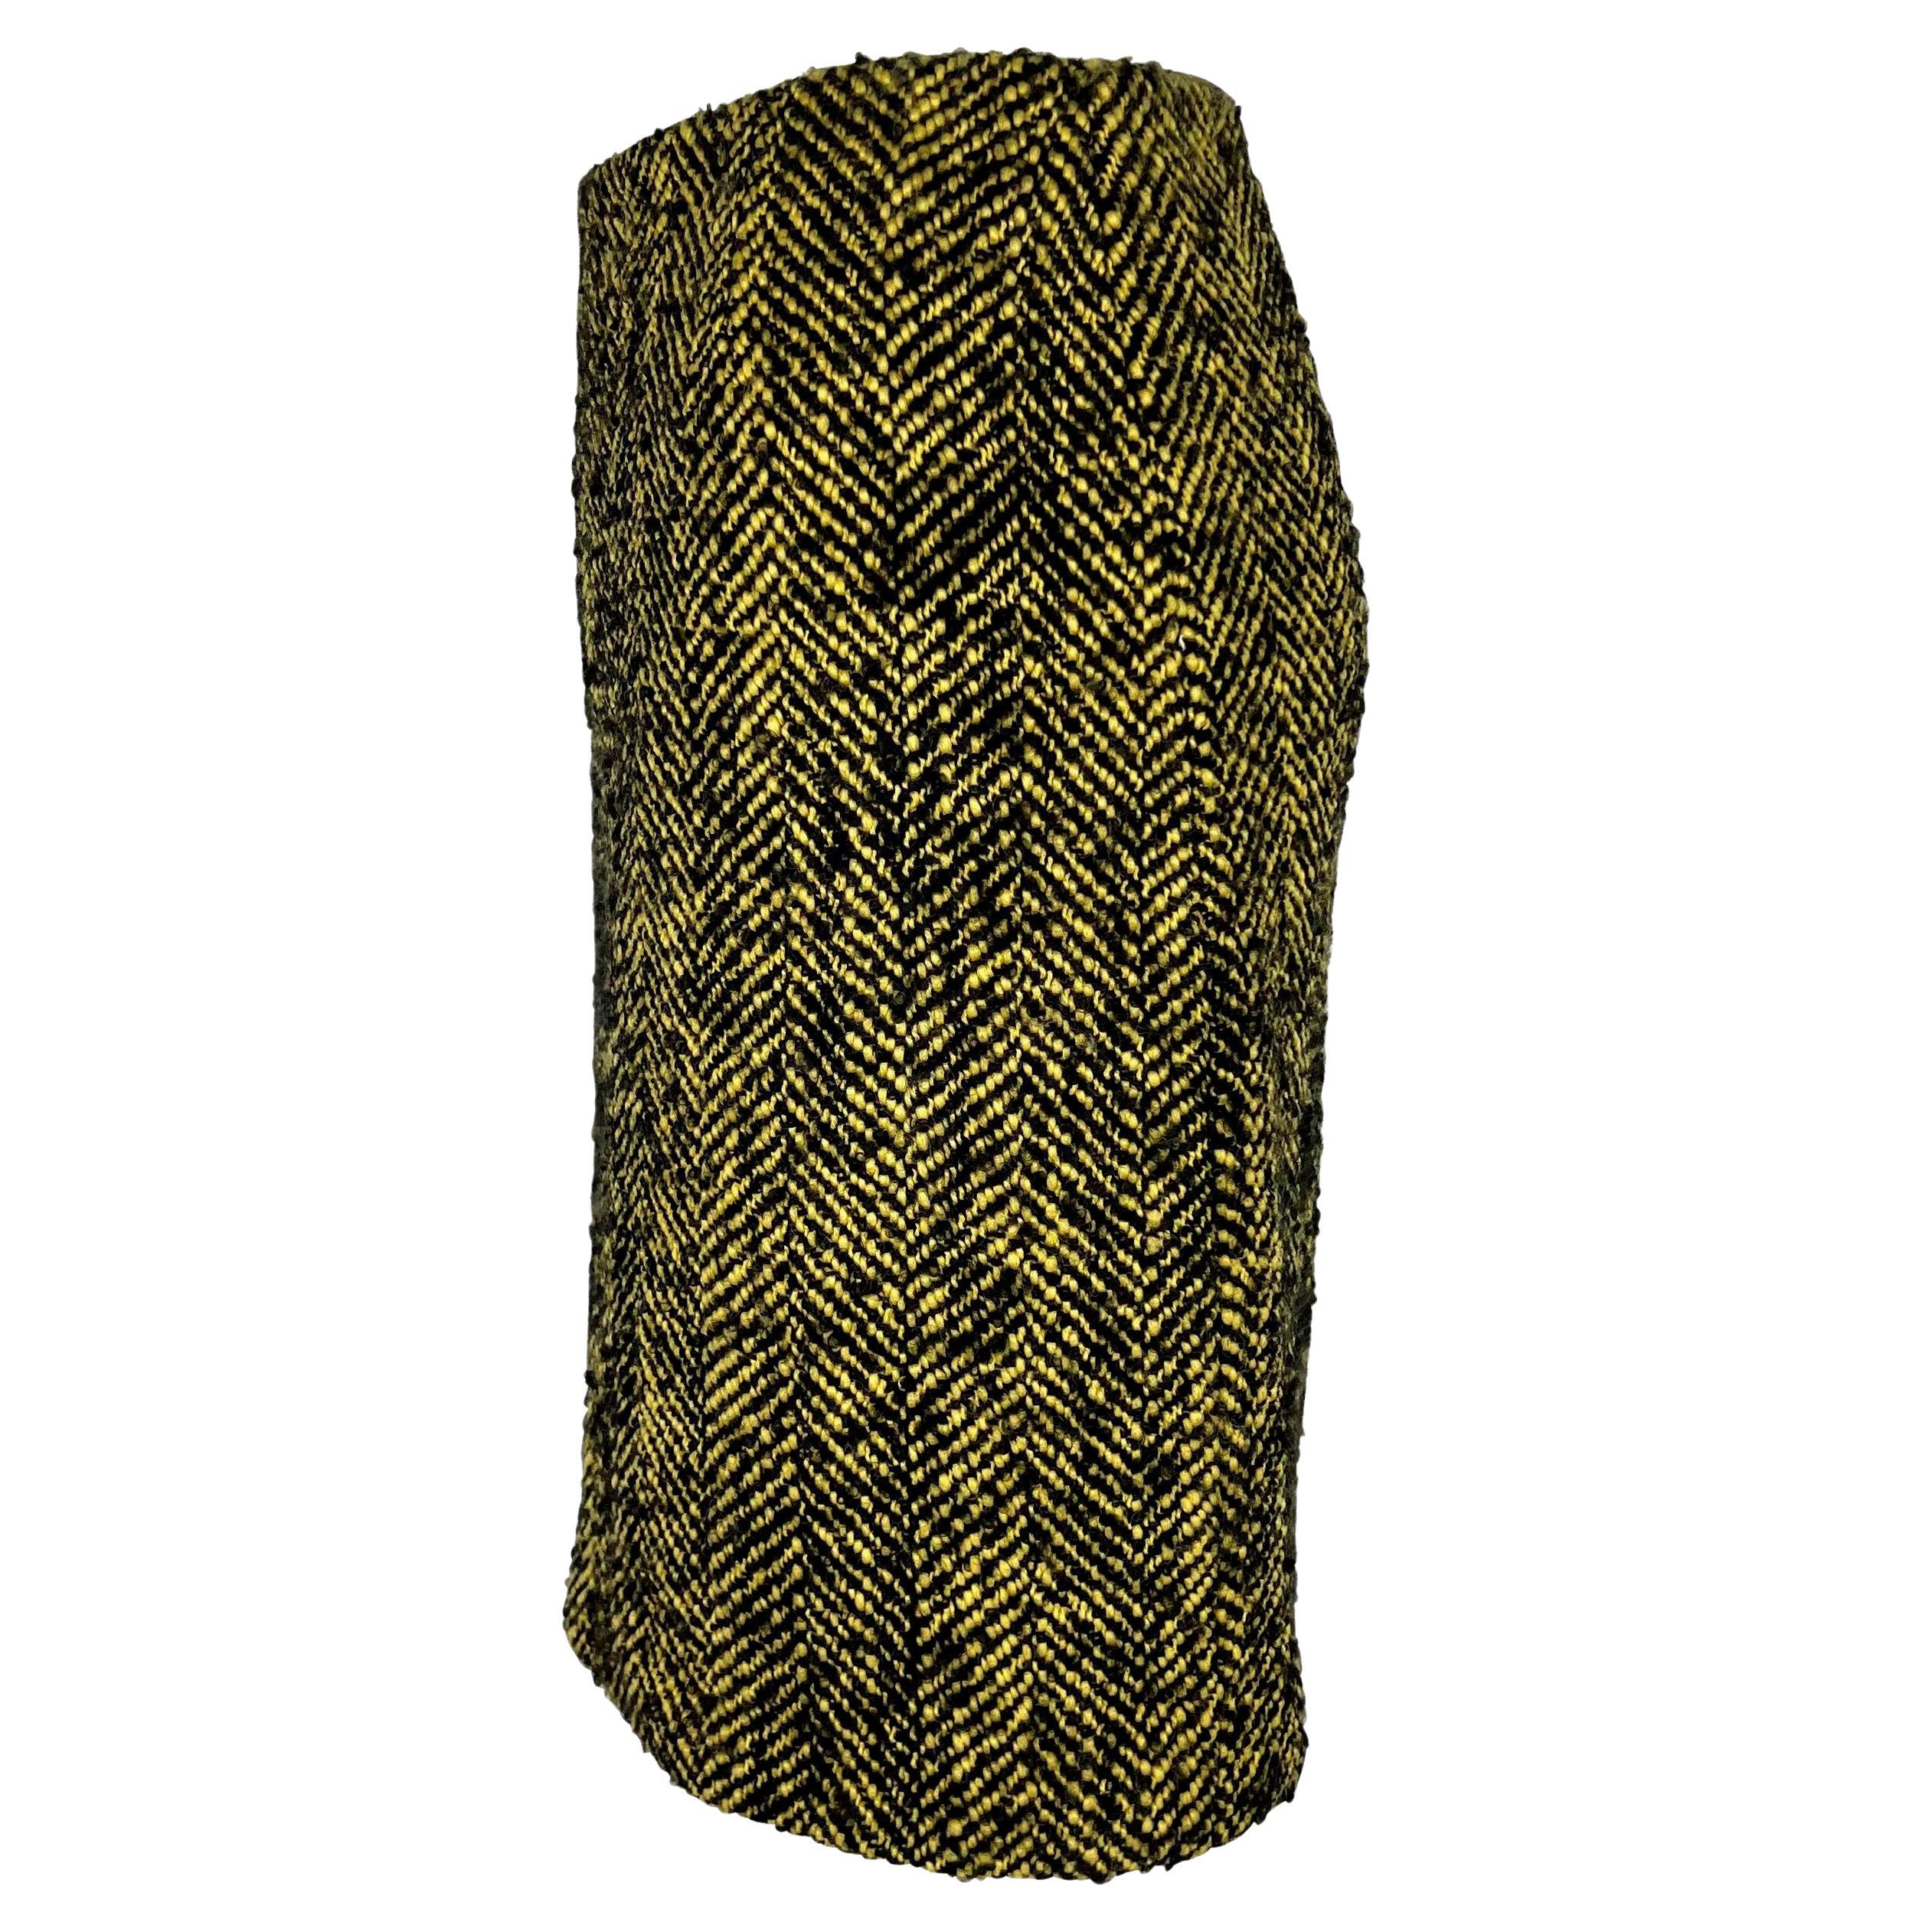 1990s Gianni Versace Couture Black Yellow Chevron Tweed Skirt In Excellent Condition For Sale In West Hollywood, CA